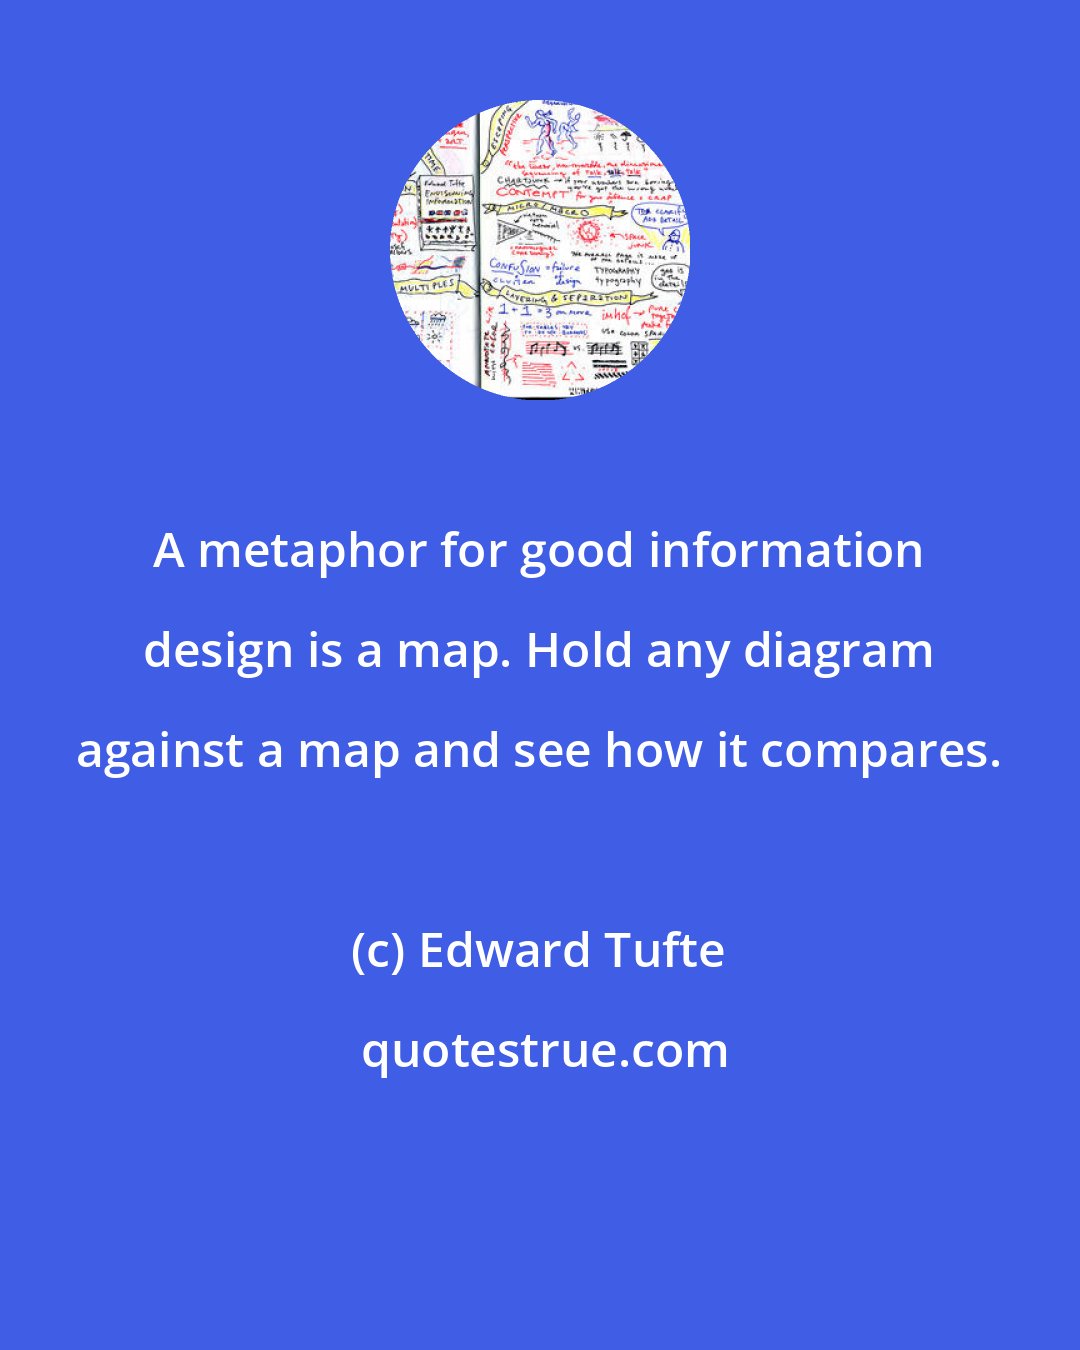 Edward Tufte: A metaphor for good information design is a map. Hold any diagram against a map and see how it compares.